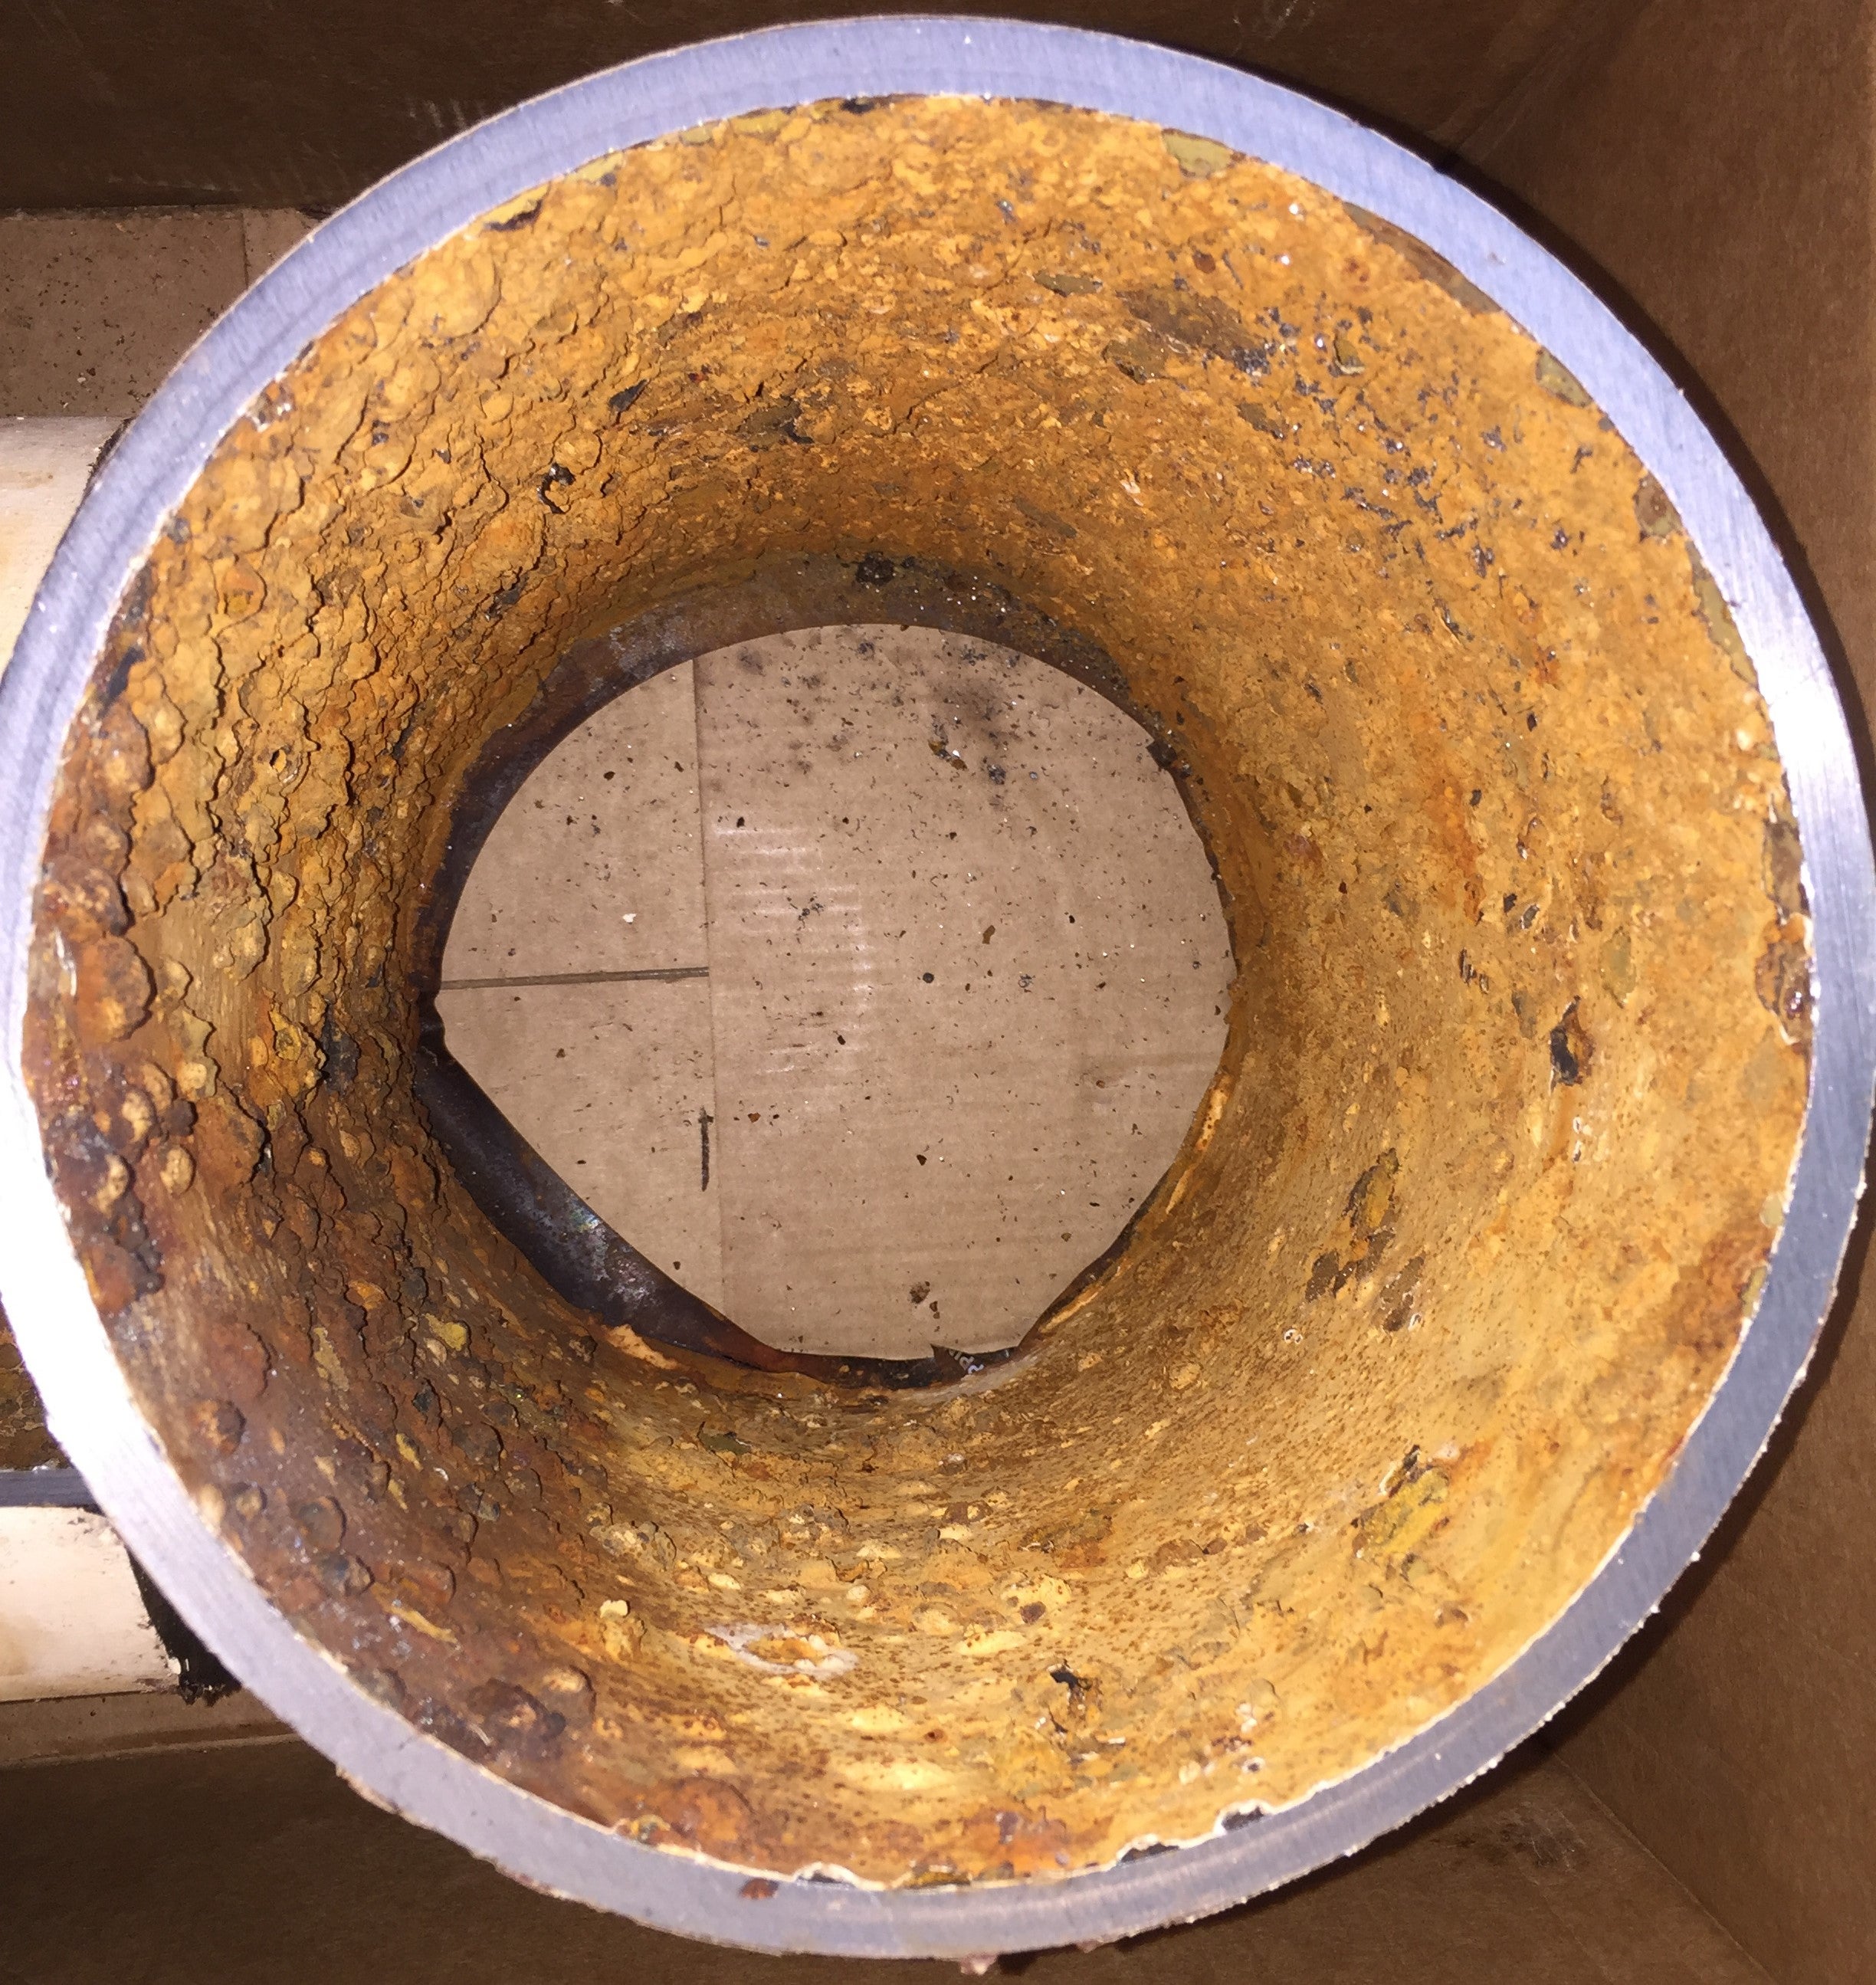 The rusted interior of this water pipe contains chromium that reacts with residual water disinfectants to form carcinogenic hexavalent chromium. (Water Chemistry and Technology Lab/UCR)